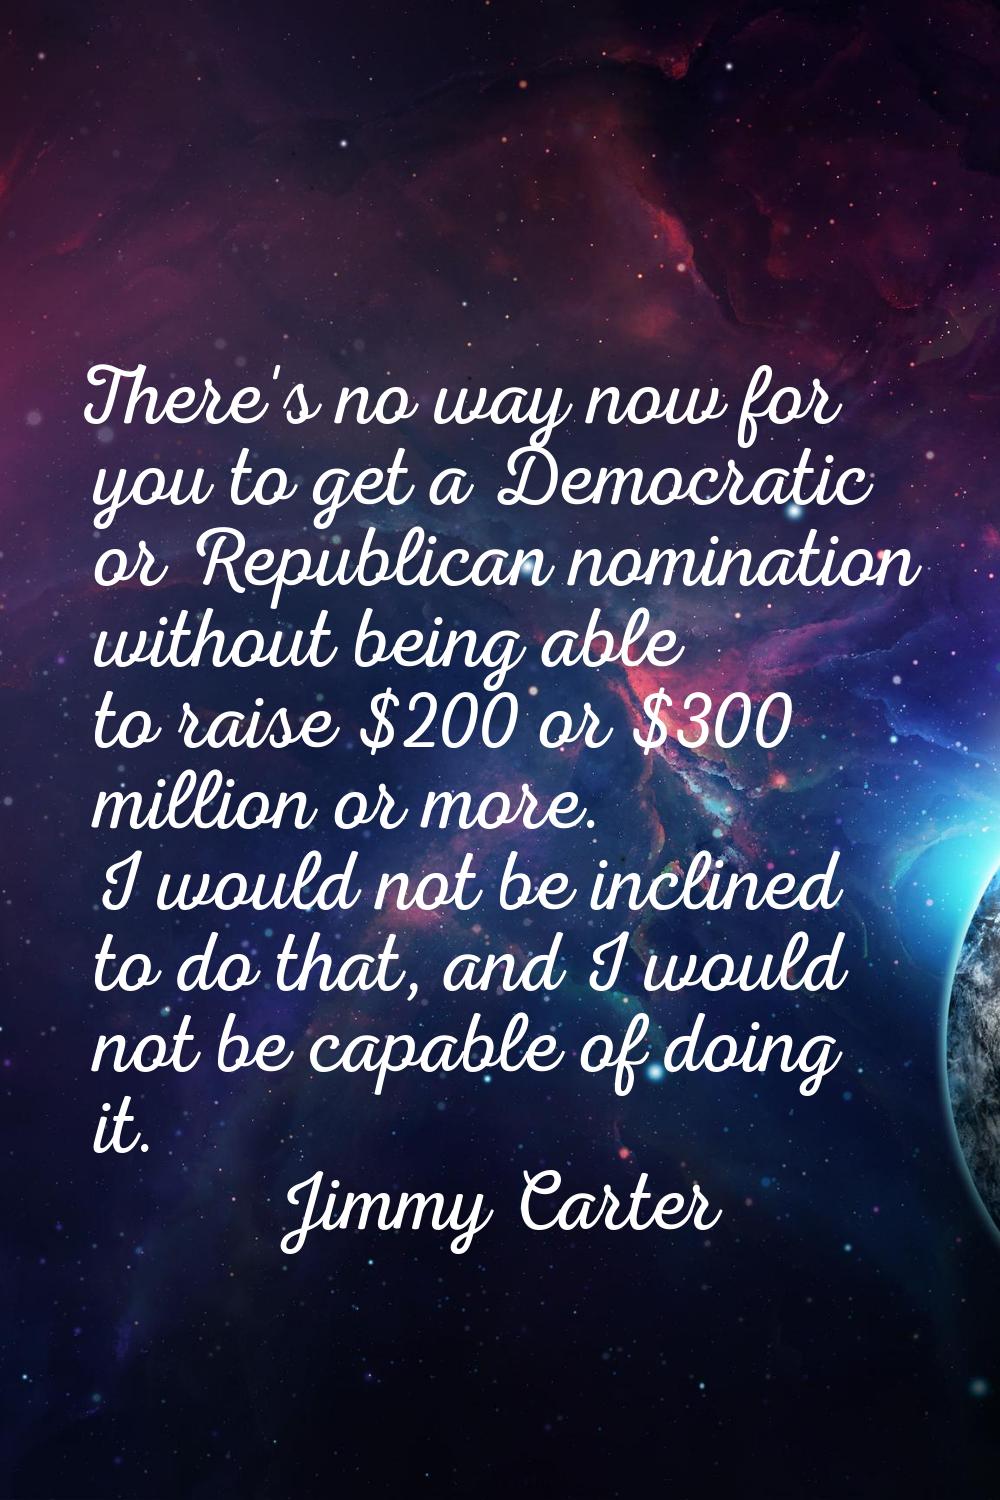 There's no way now for you to get a Democratic or Republican nomination without being able to raise